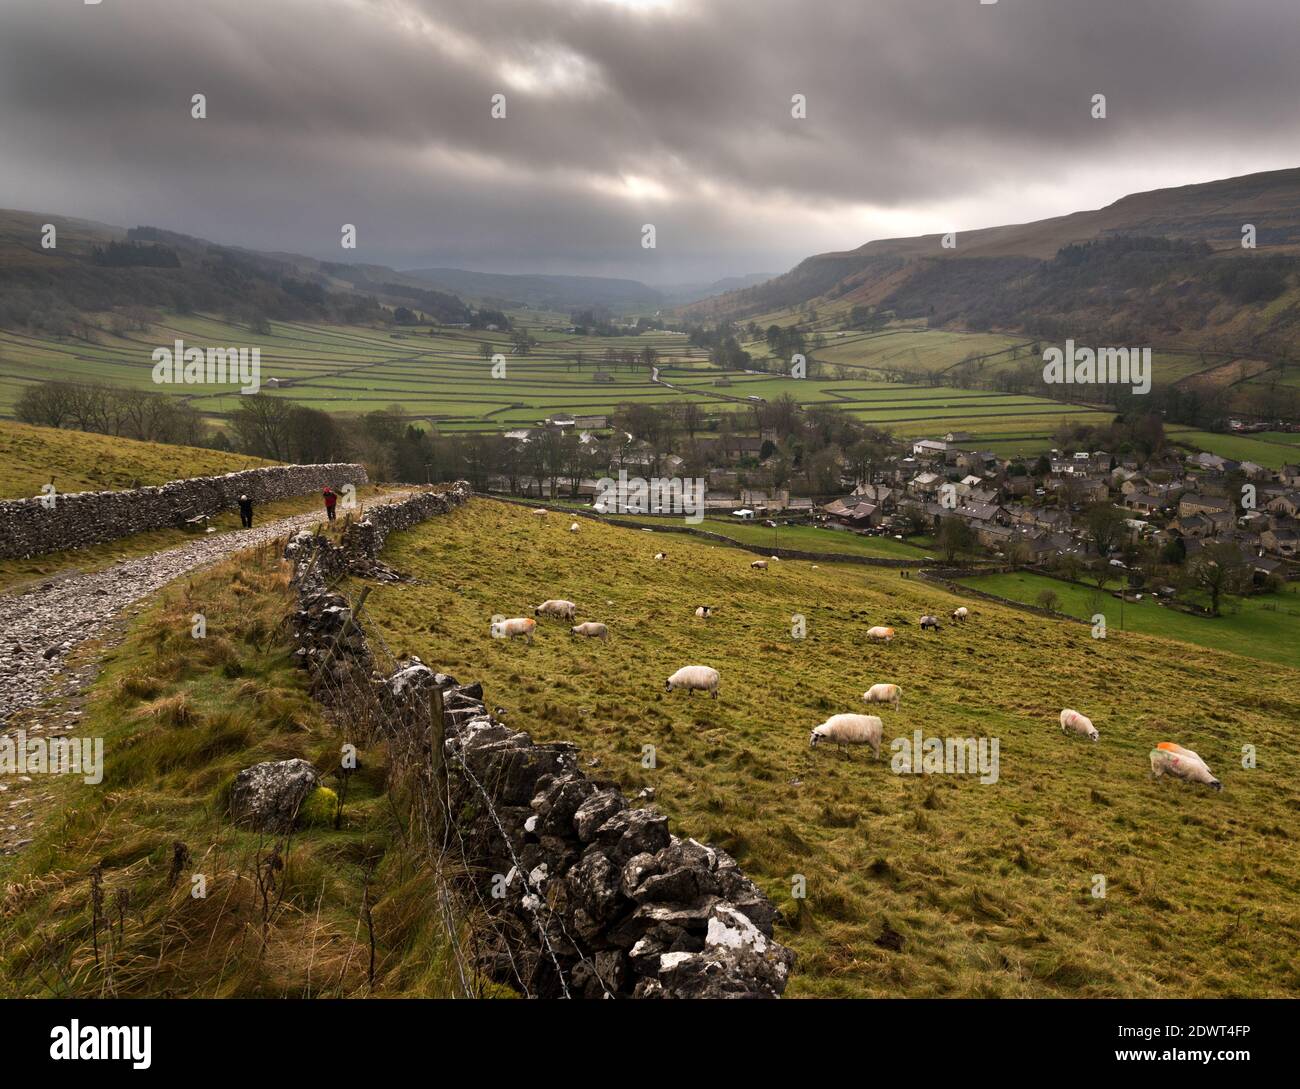 A rainy December day in Wharfedale, Yorkshire Dales National Park, UK. Kettlewell villages lies at the bottom of the hill. Stock Photo